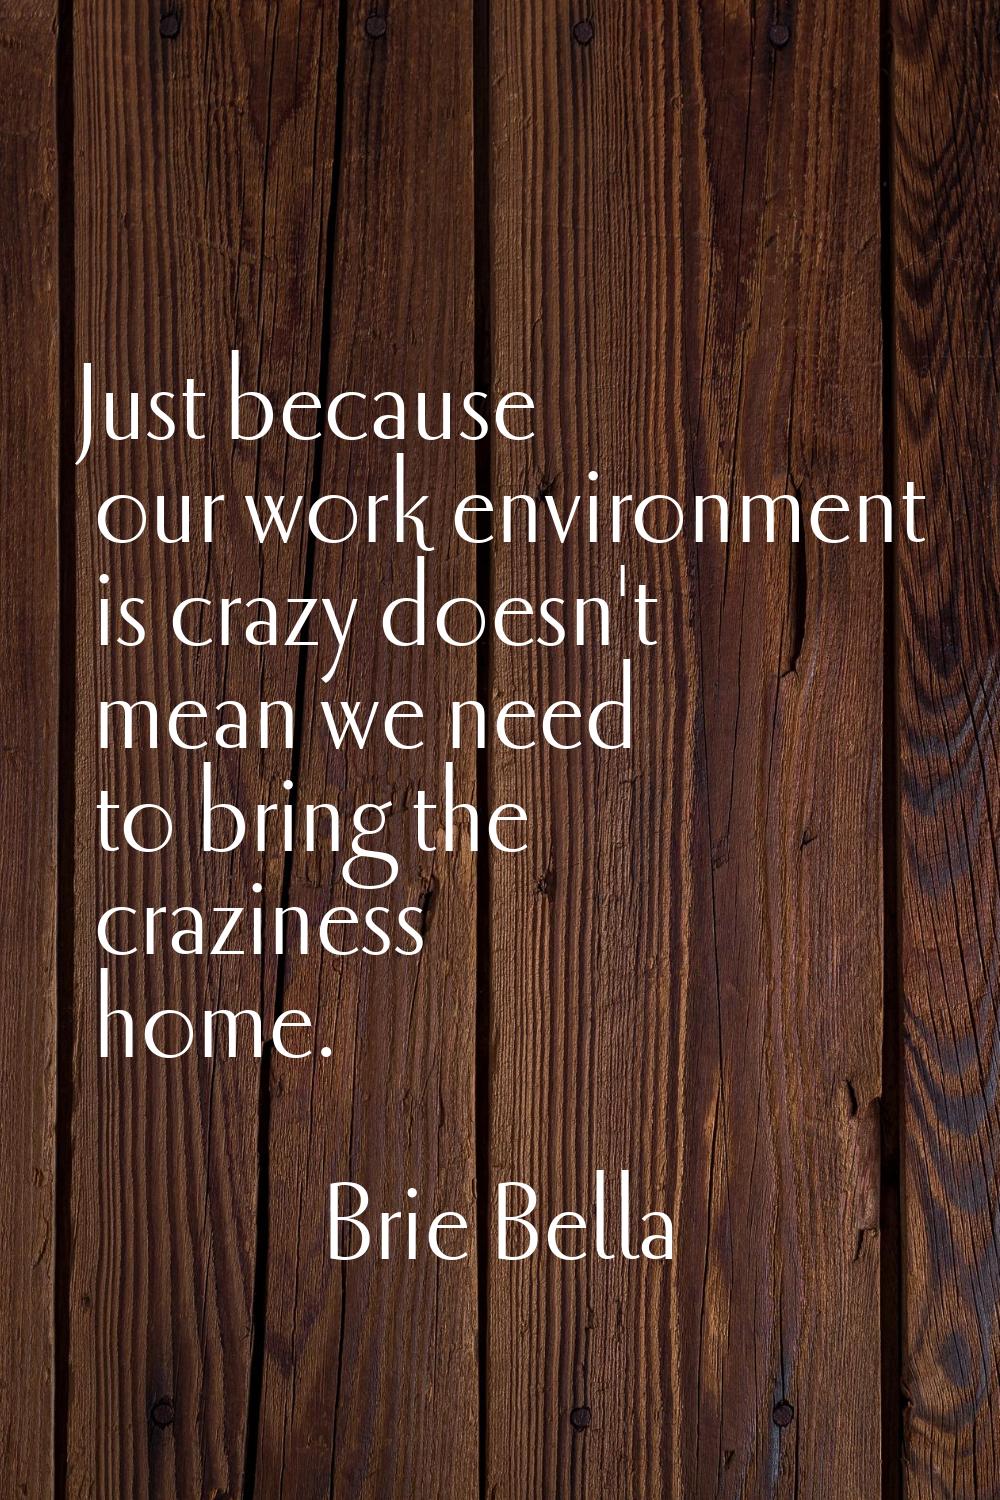 Just because our work environment is crazy doesn't mean we need to bring the craziness home.